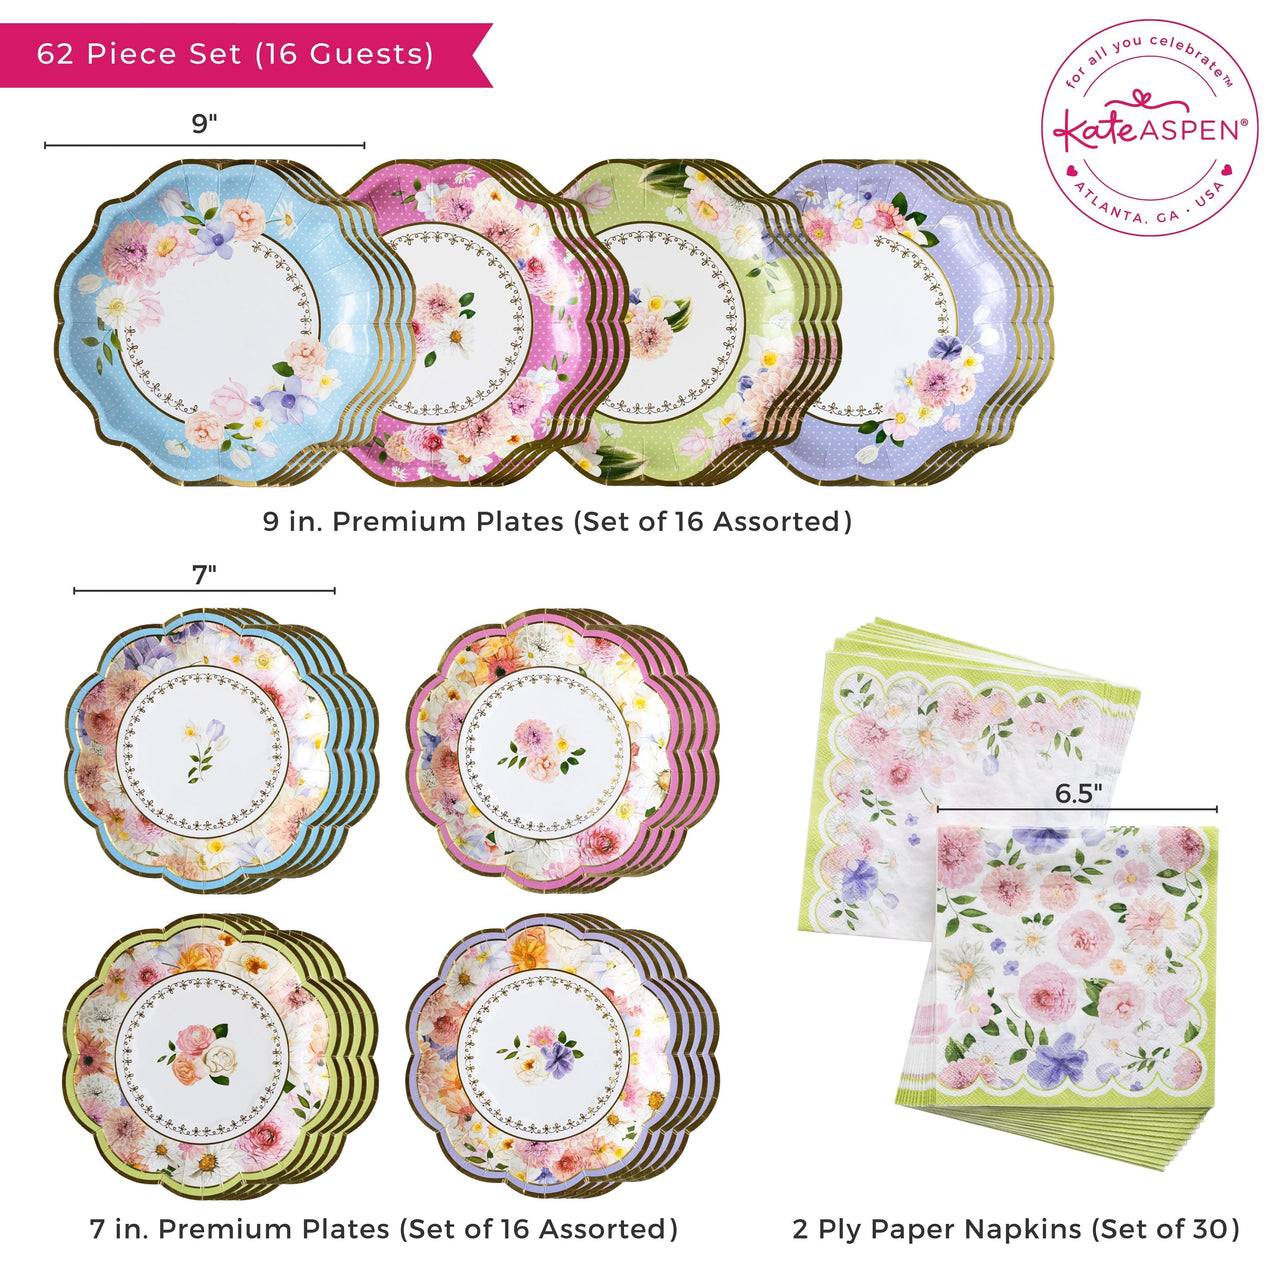 Tea Time Party 78 Piece Party Tableware Set (16 Guests) Atlernate 6